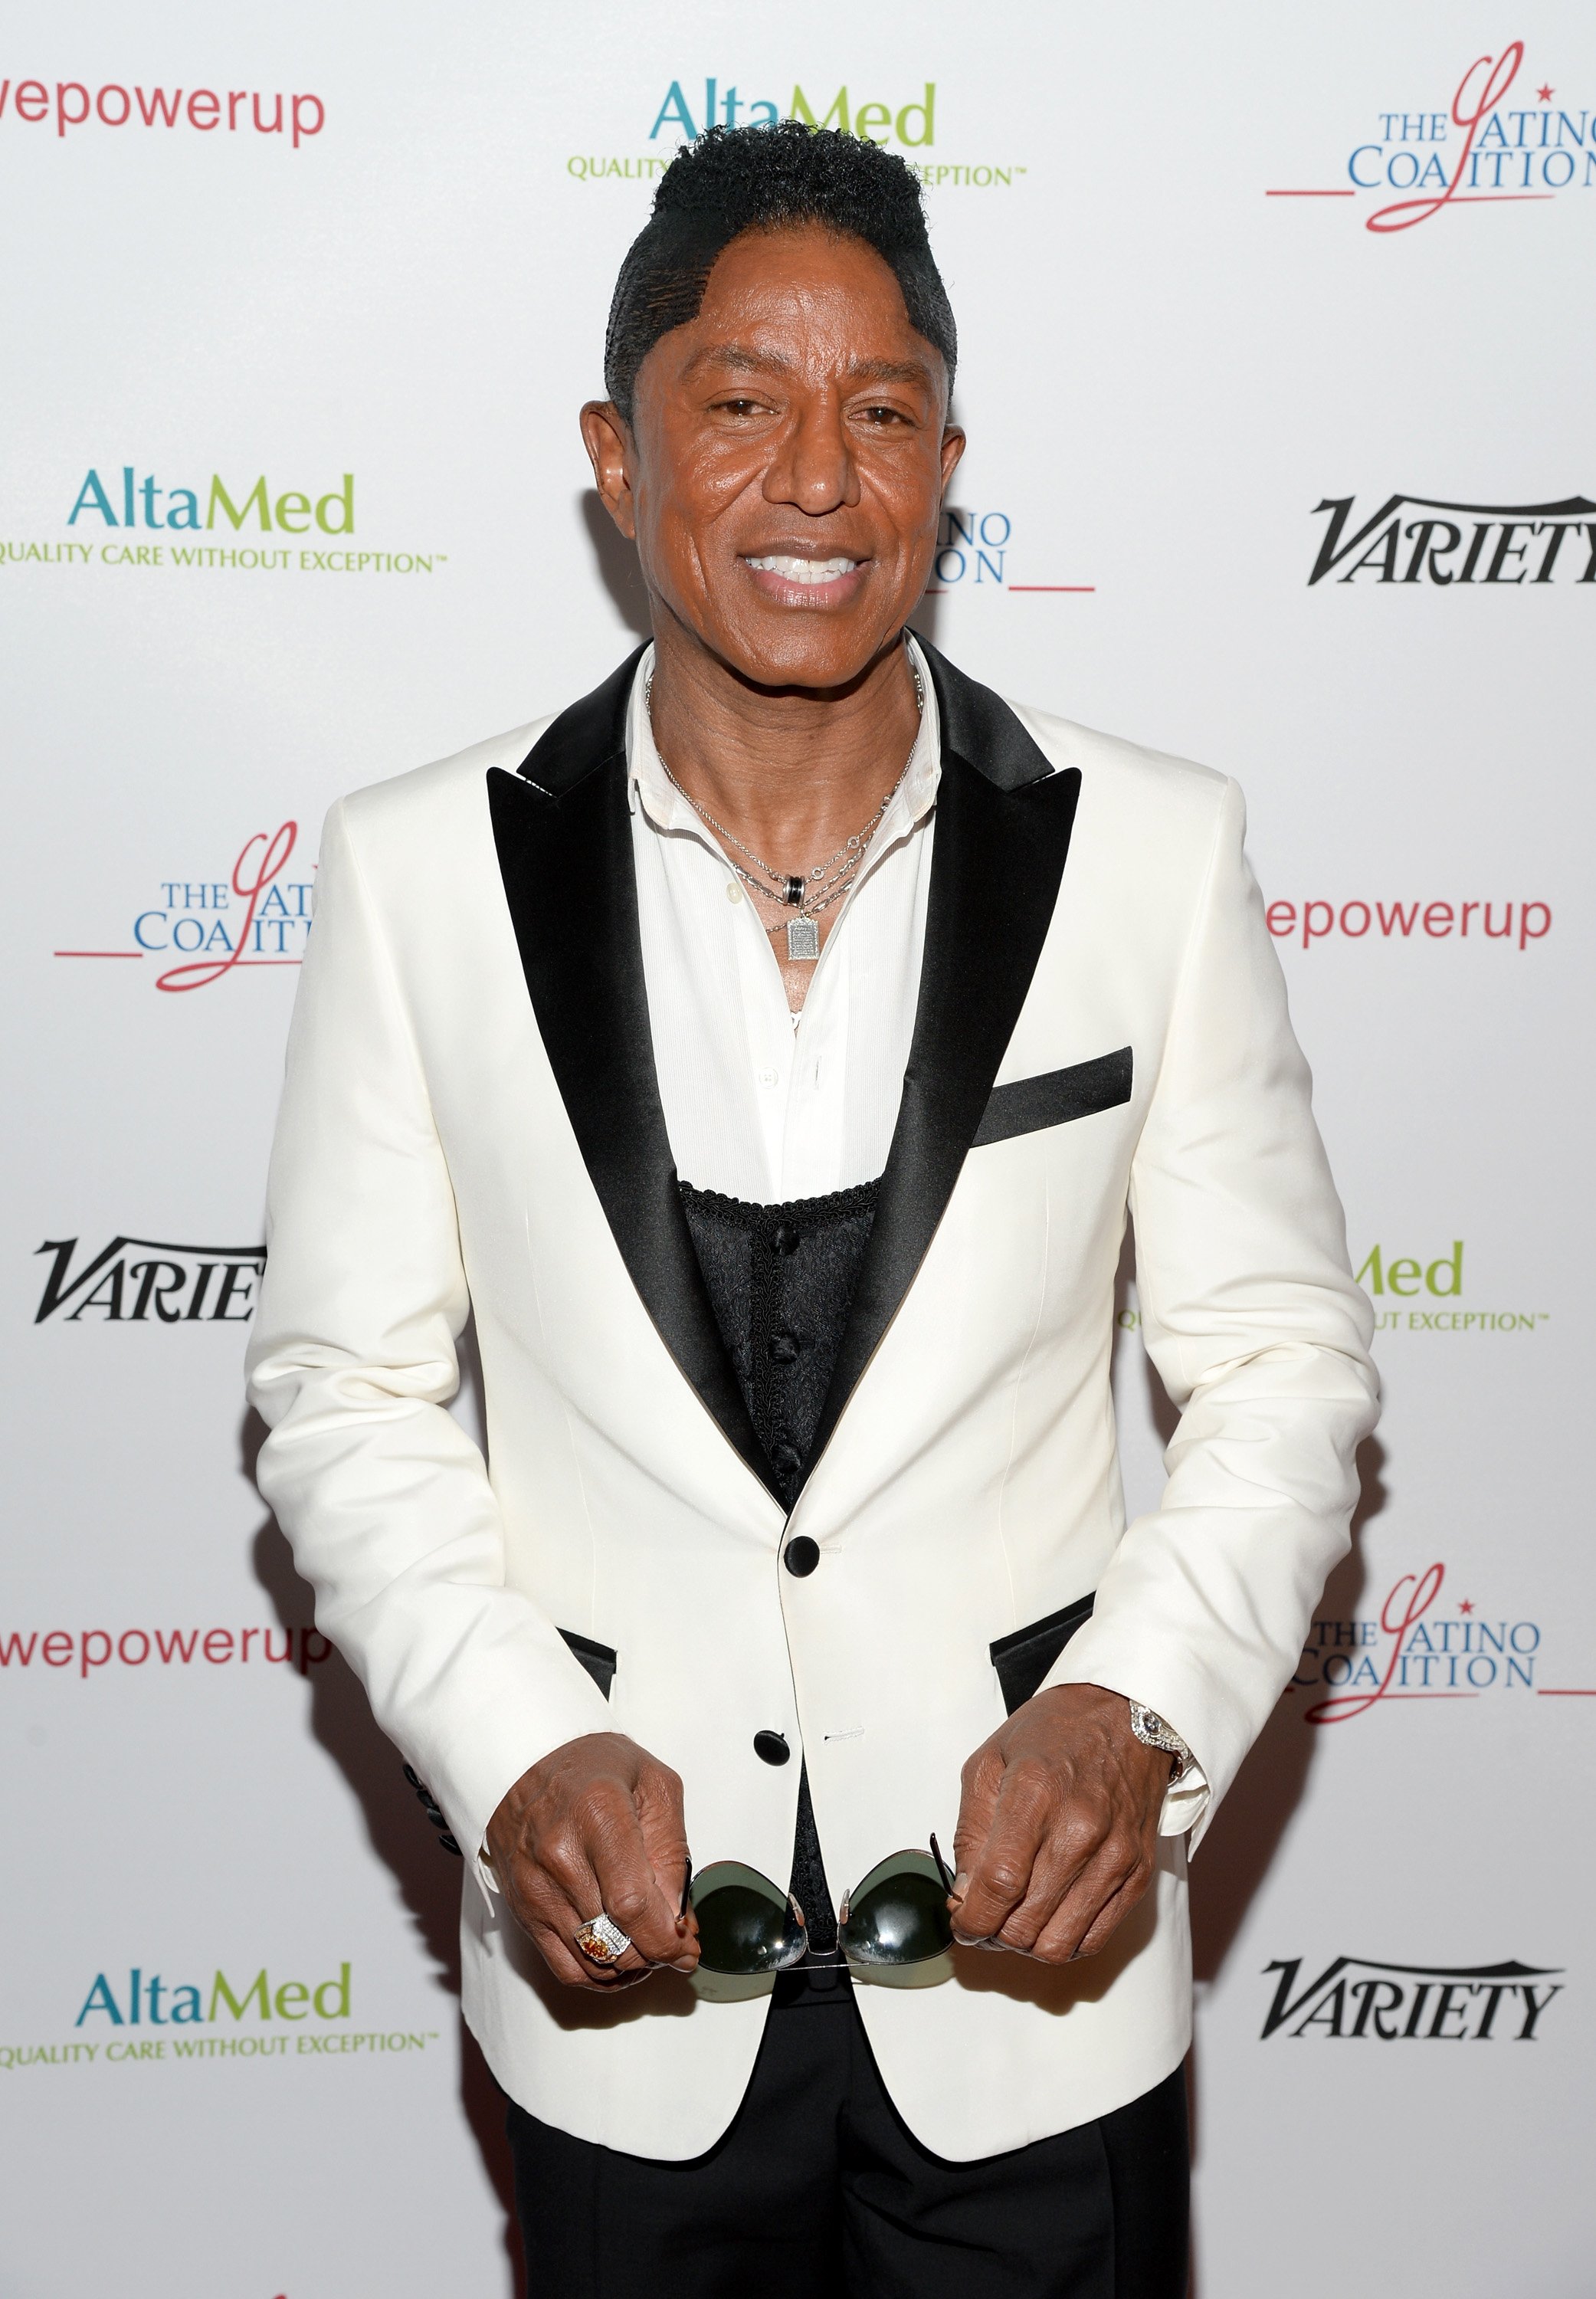 Jermaine Jackson attends the AltaMed Power Up, We Are The Future Gala at the Beverly Wilshire Four Seasons Hotel on May 12, 2016, in Beverly Hills, California. | Source: Getty Images.